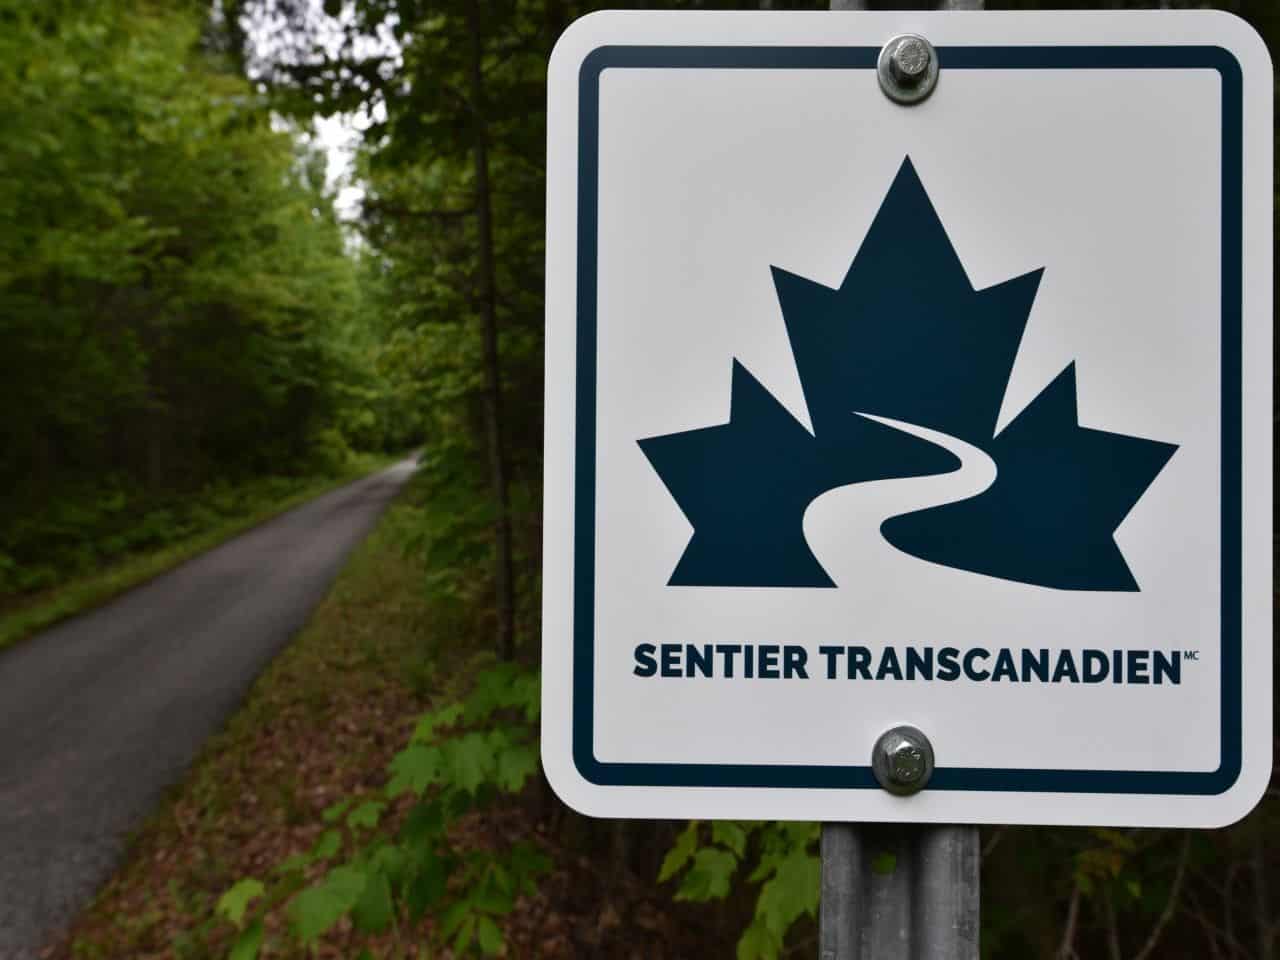 Sentier Transcanadien is a well signed hiking and cycling path across Quebec, Canada.